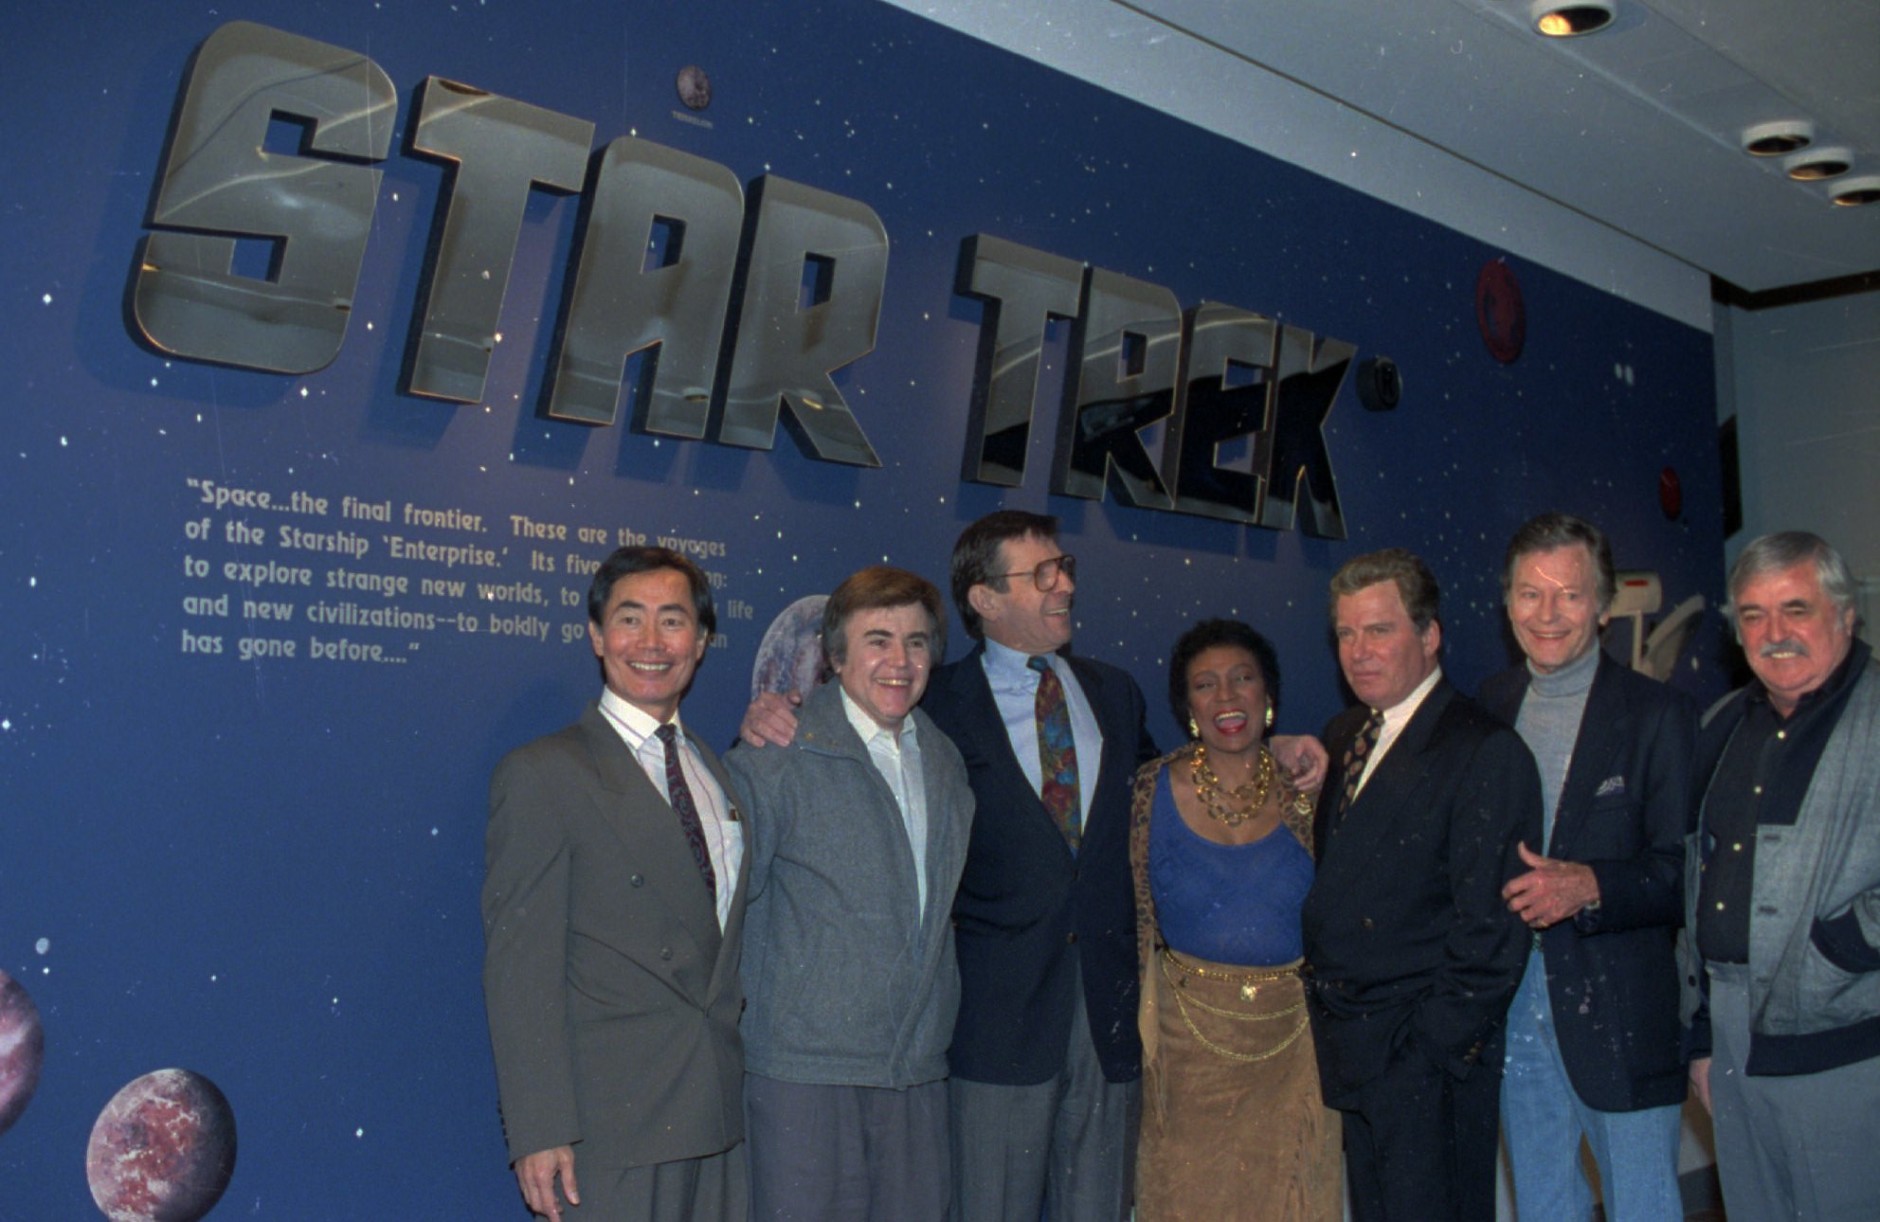 Cast members of the origninal Star Trek series pose at the entrance of the Star Trek exhibit at the Smithsonian's National Air and Space Museum in Washington Feb. 26,1992. From left, are: George Takei, Walter Koenig, Leonard Nimoy, Nichelle Nichols, William Shatner, DeForest Kelley, and James Doohan. The actors were on hand for the exhibit opening. (AP Photo/Ron Edmonds)